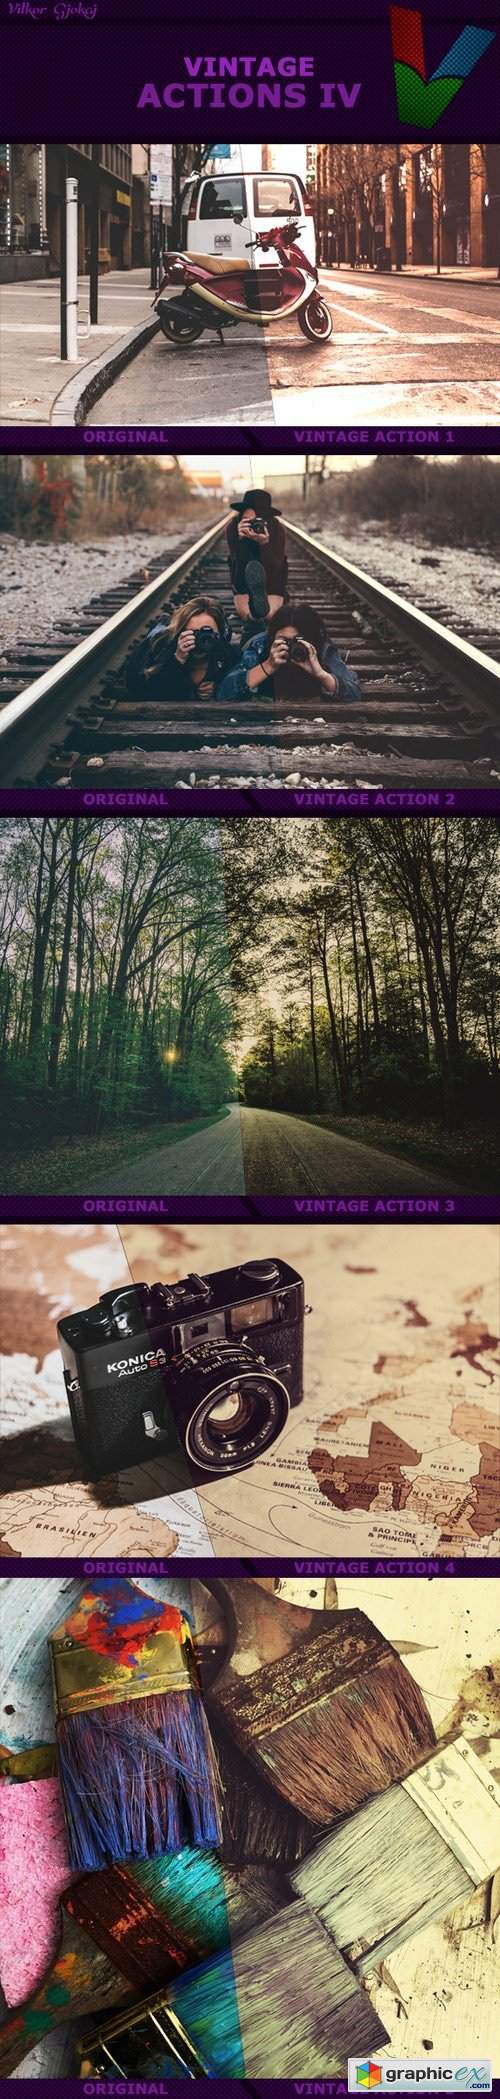 Vintage Actions IV